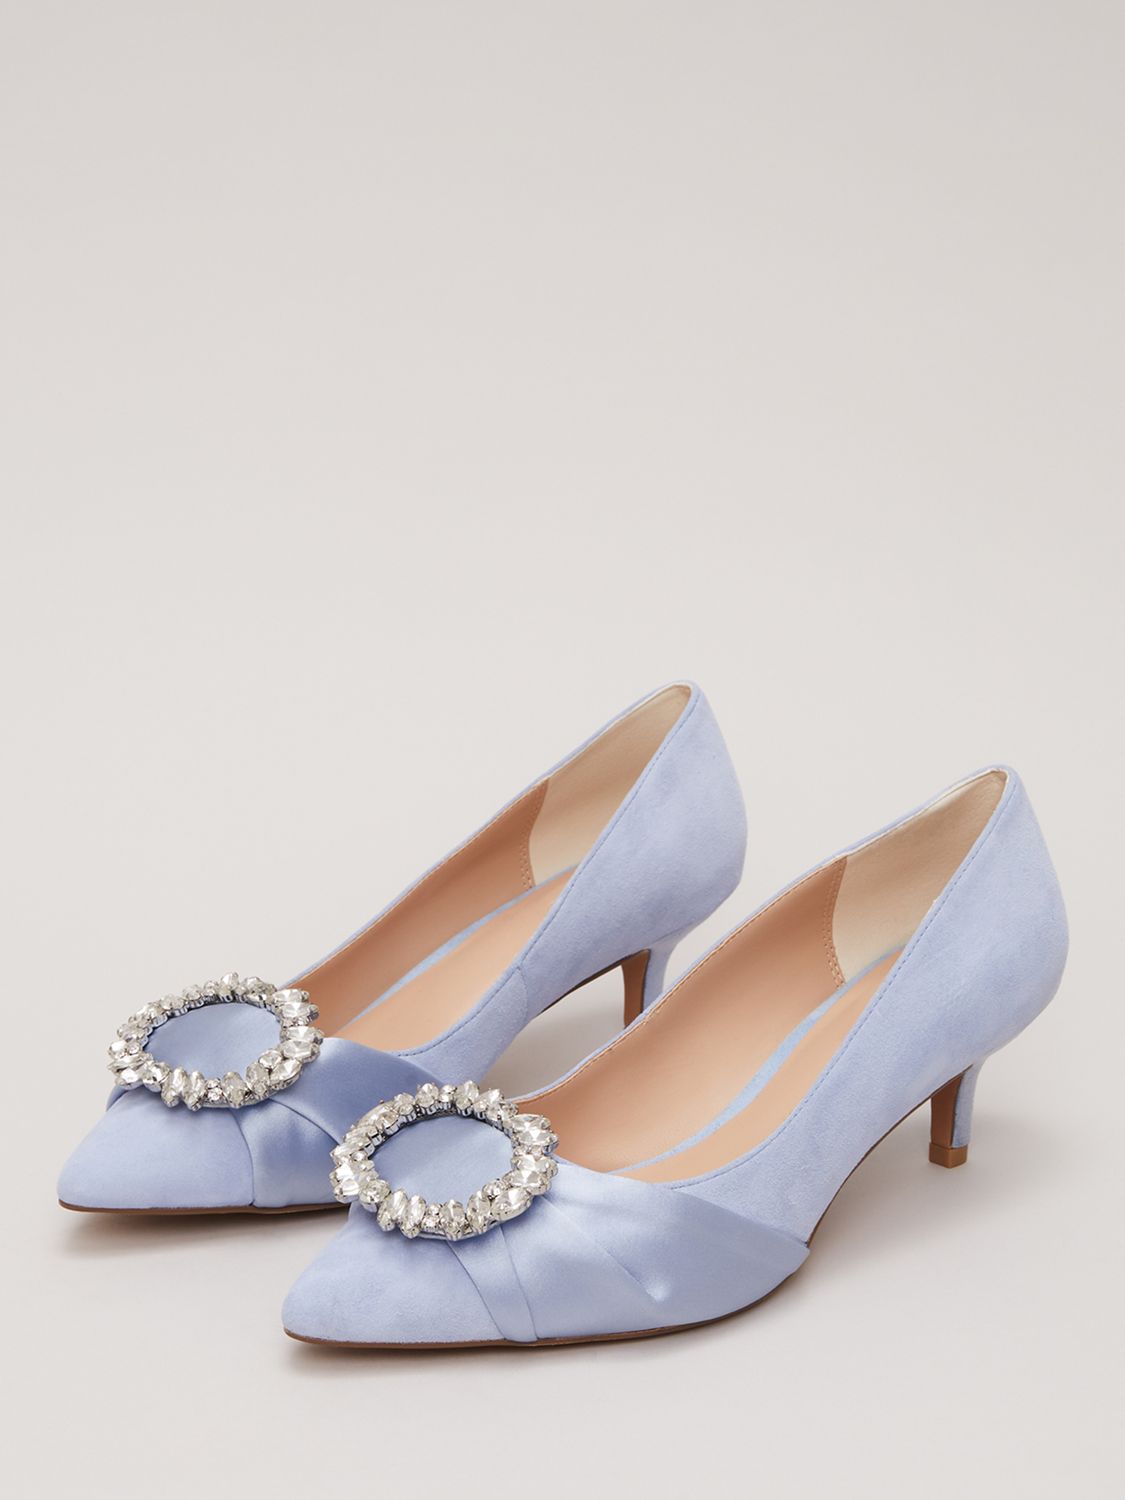 Phase Eight Suede Embellished Pointed Shoes, Pale Blue, EU36